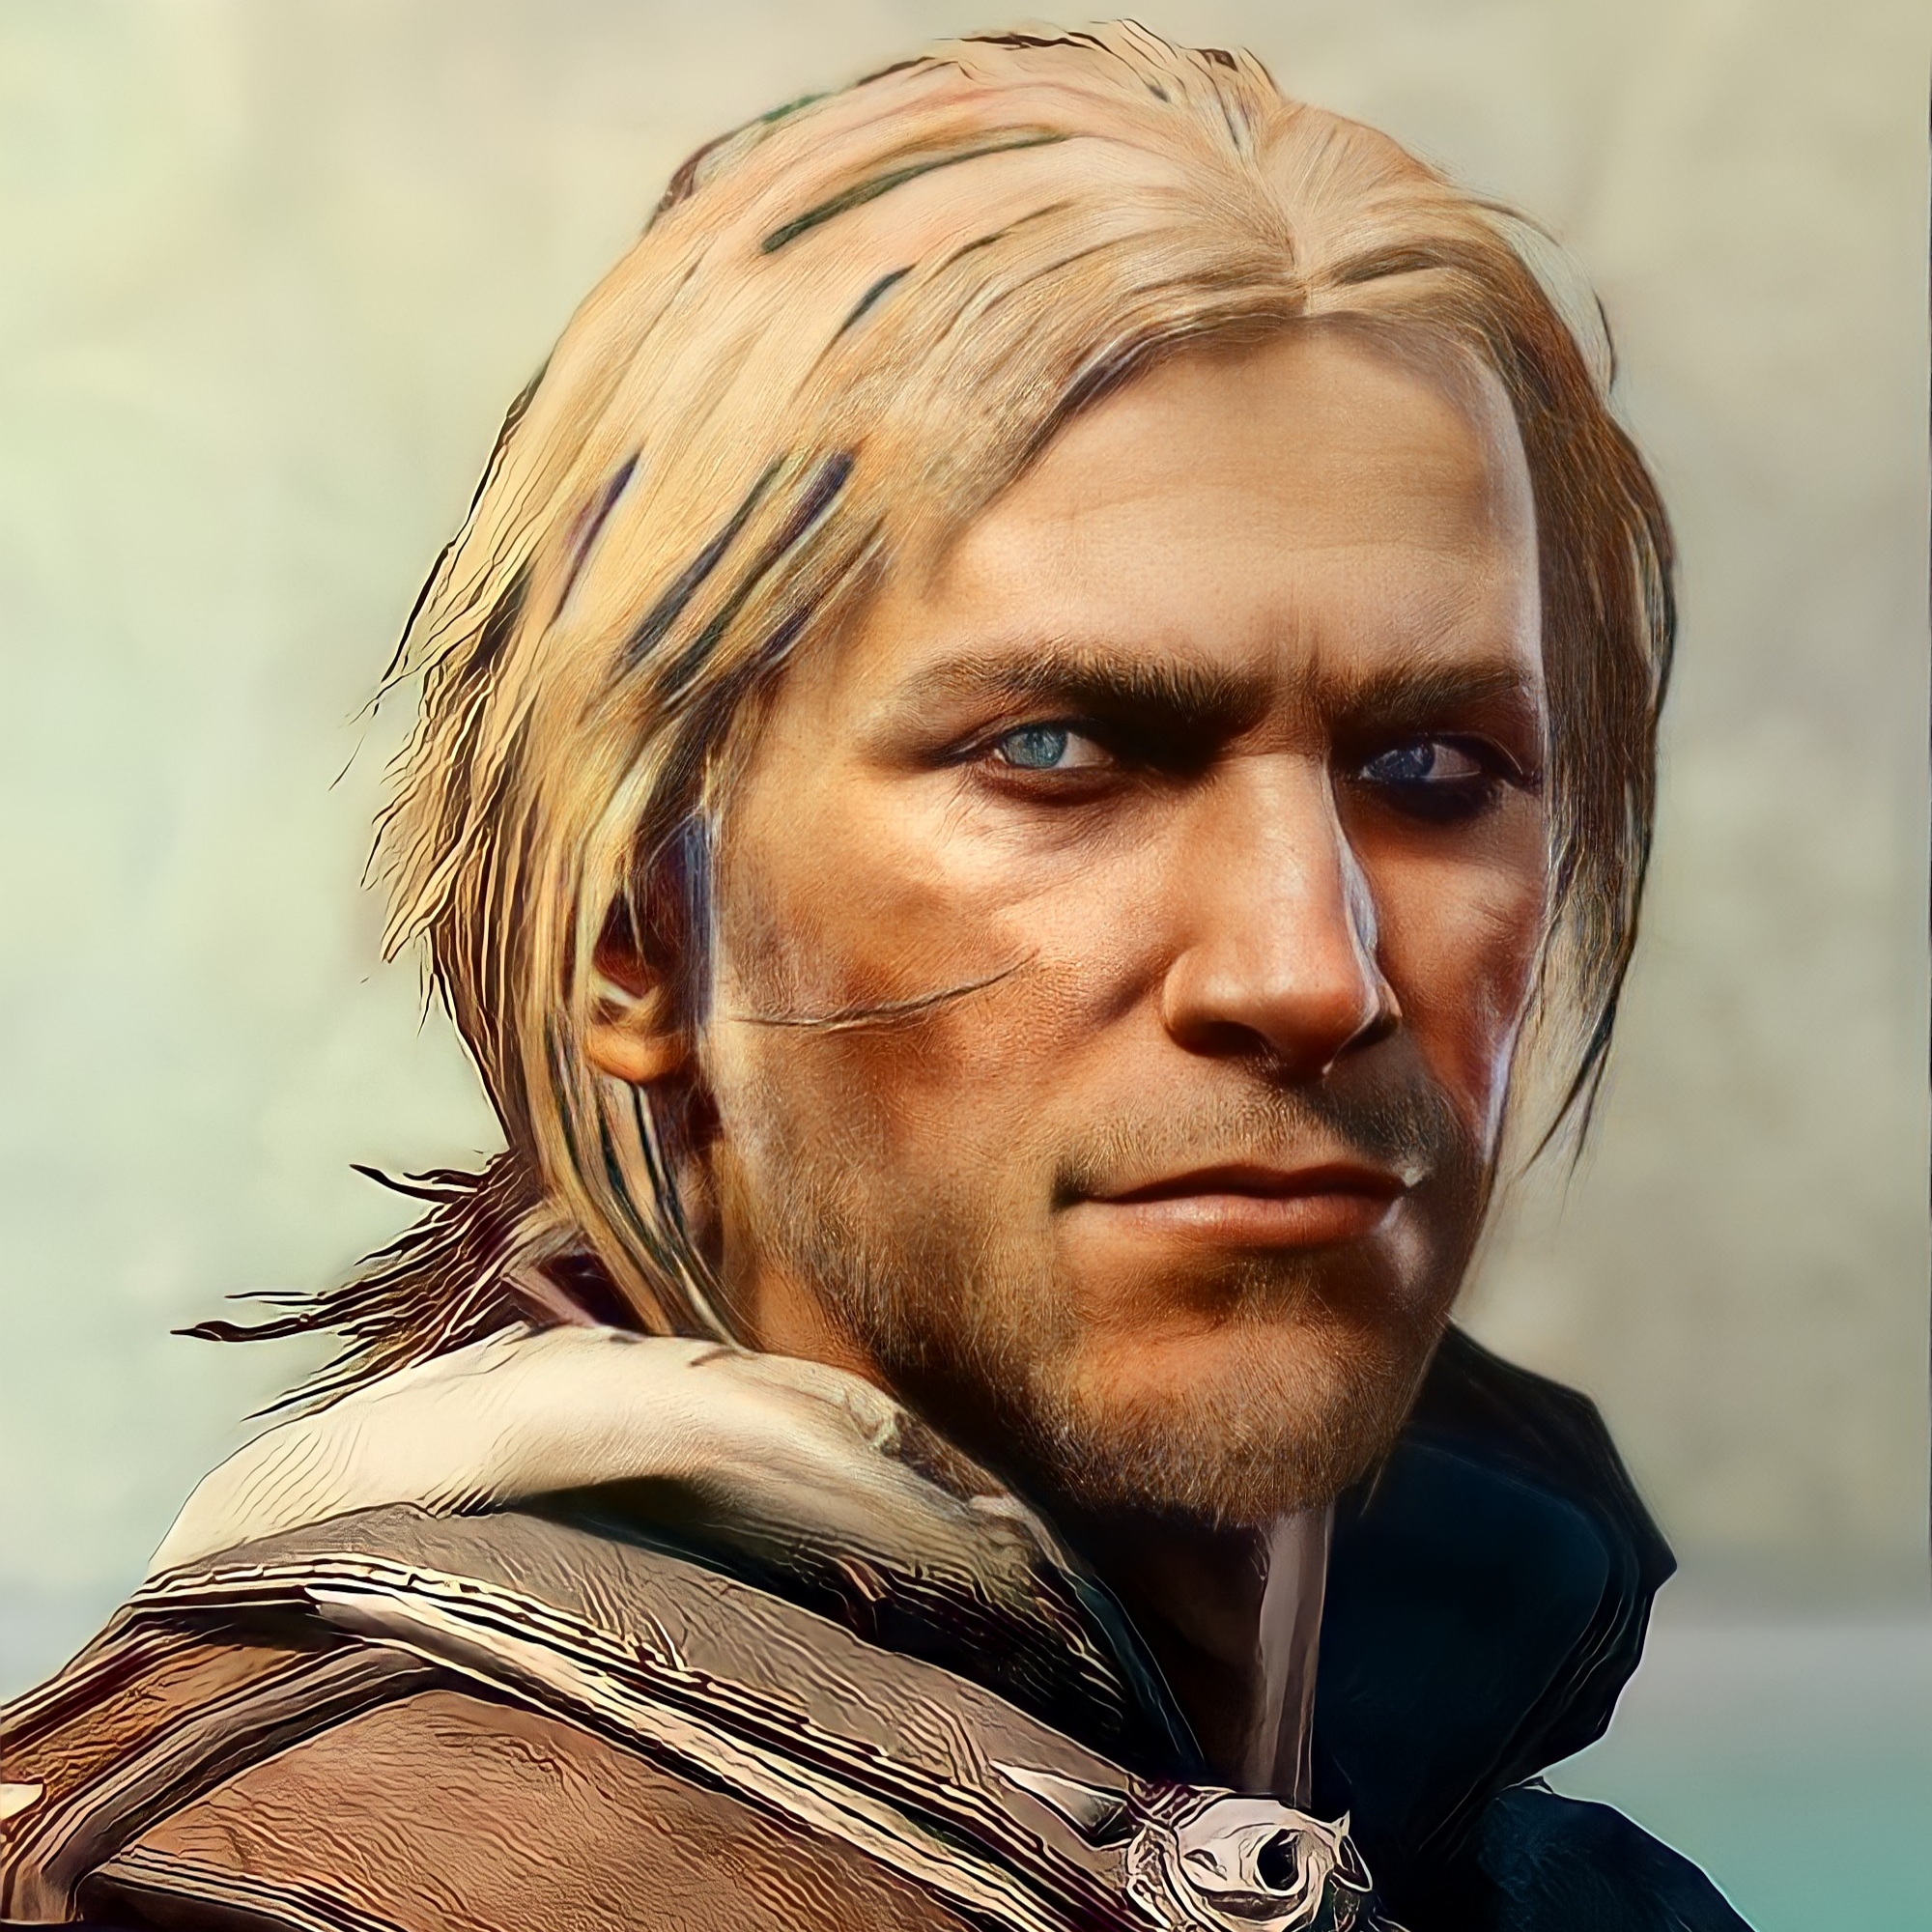 Edward Kenway by fathdepeace3